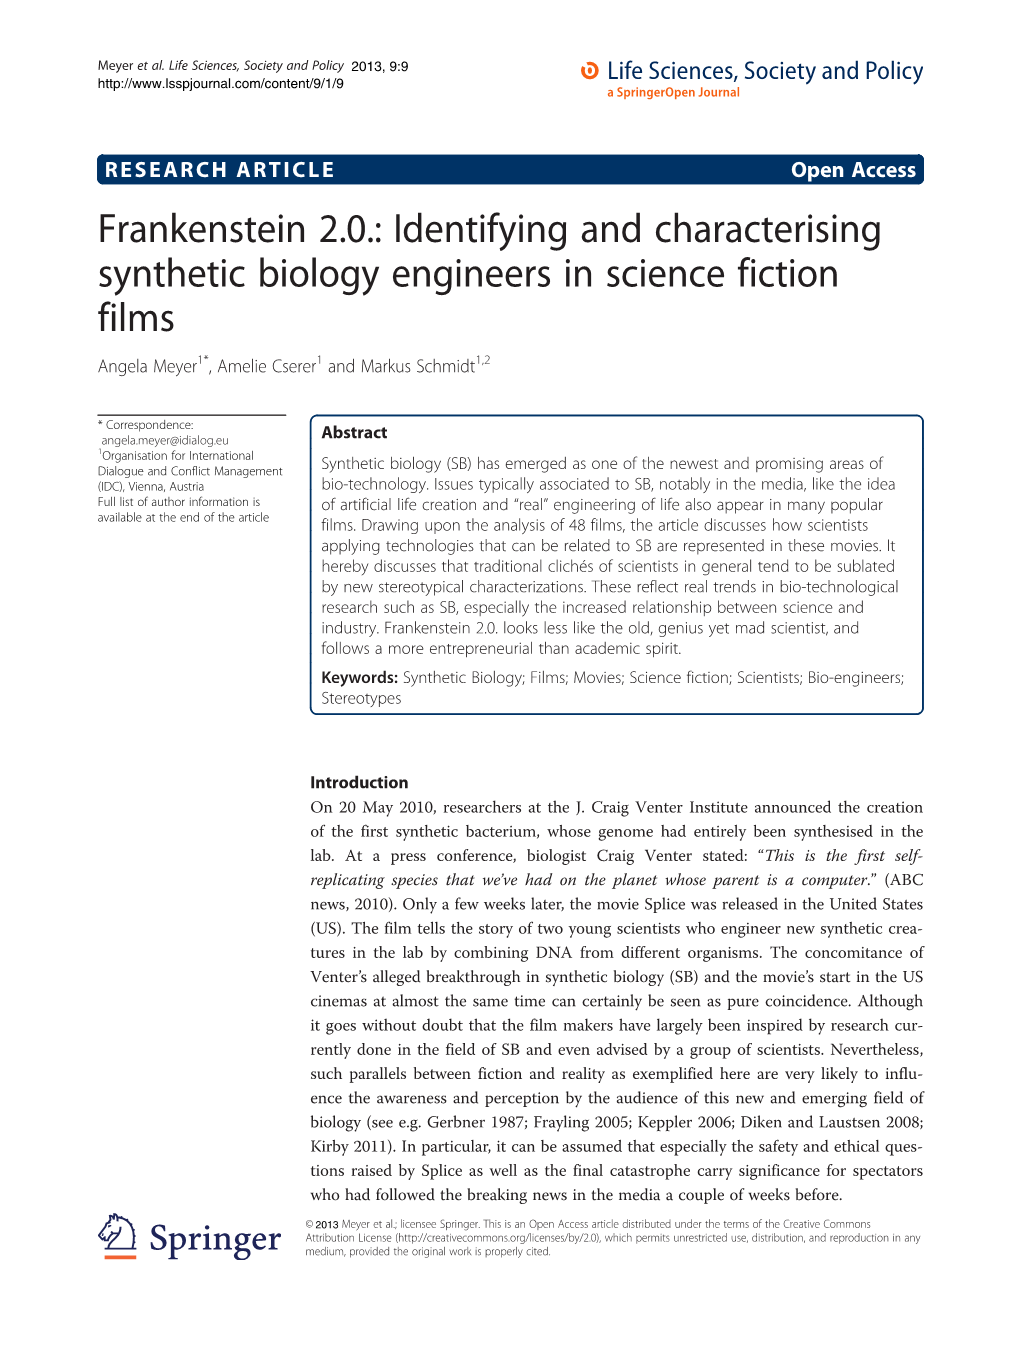 Frankenstein 2.0.: Identifying and Characterising Synthetic Biology Engineers in Science Fiction Films Angela Meyer1*, Amelie Cserer1 and Markus Schmidt1,2